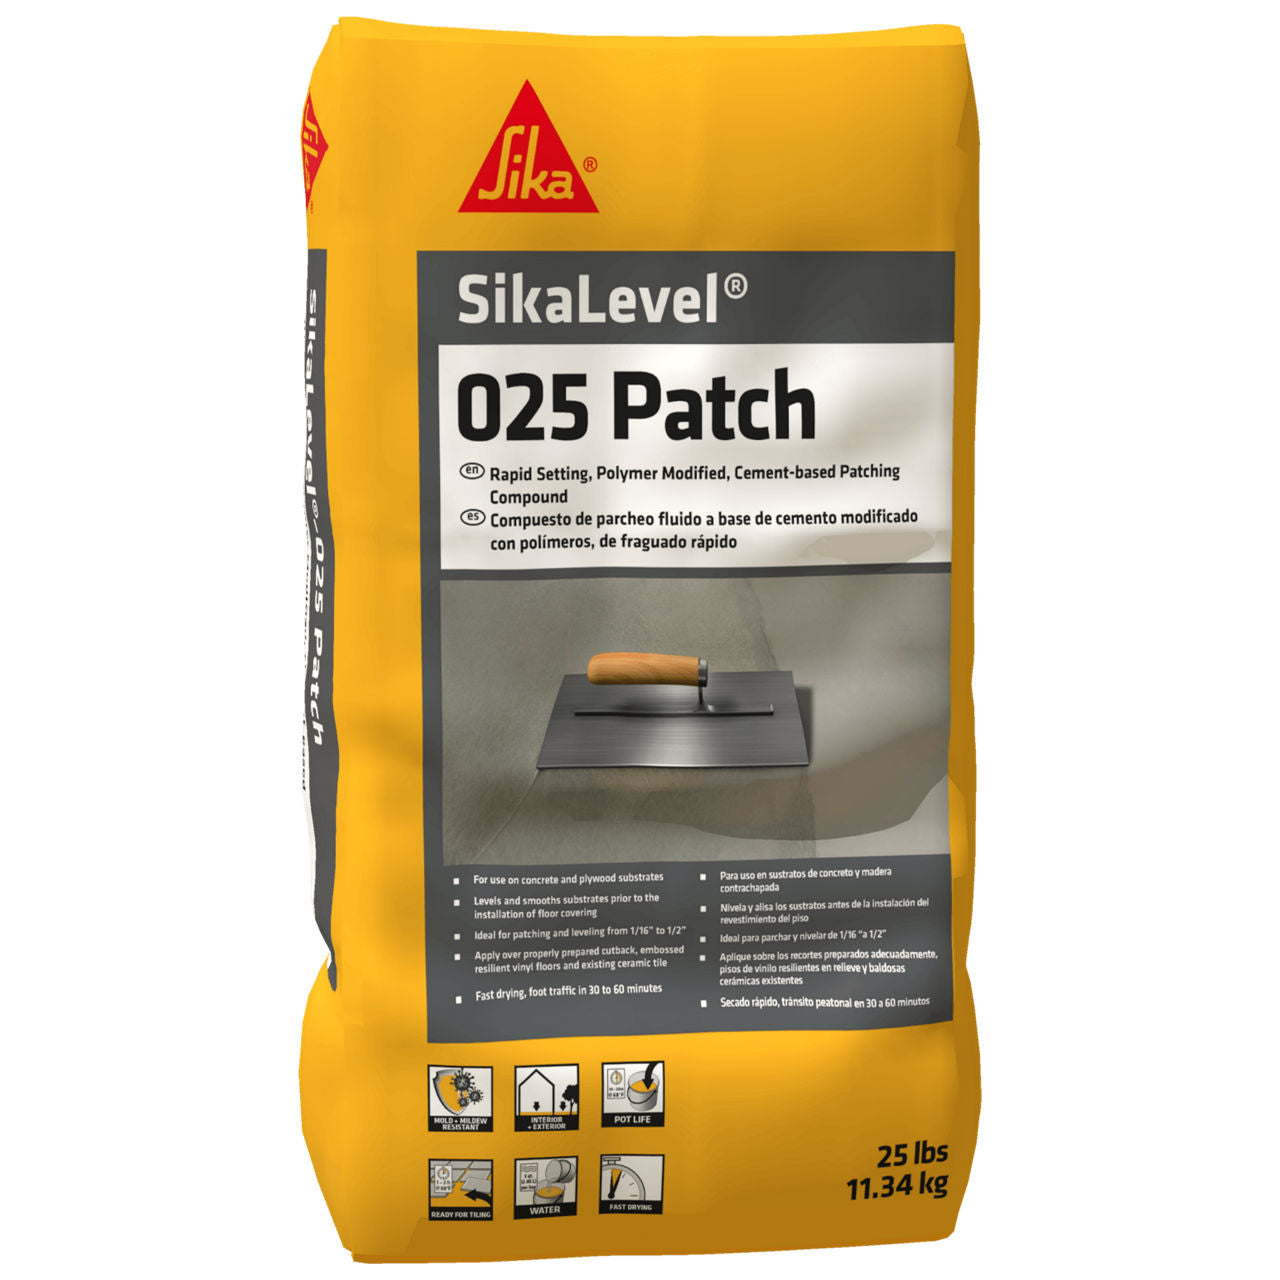 SikaLevel 025 Patch - 25lbs